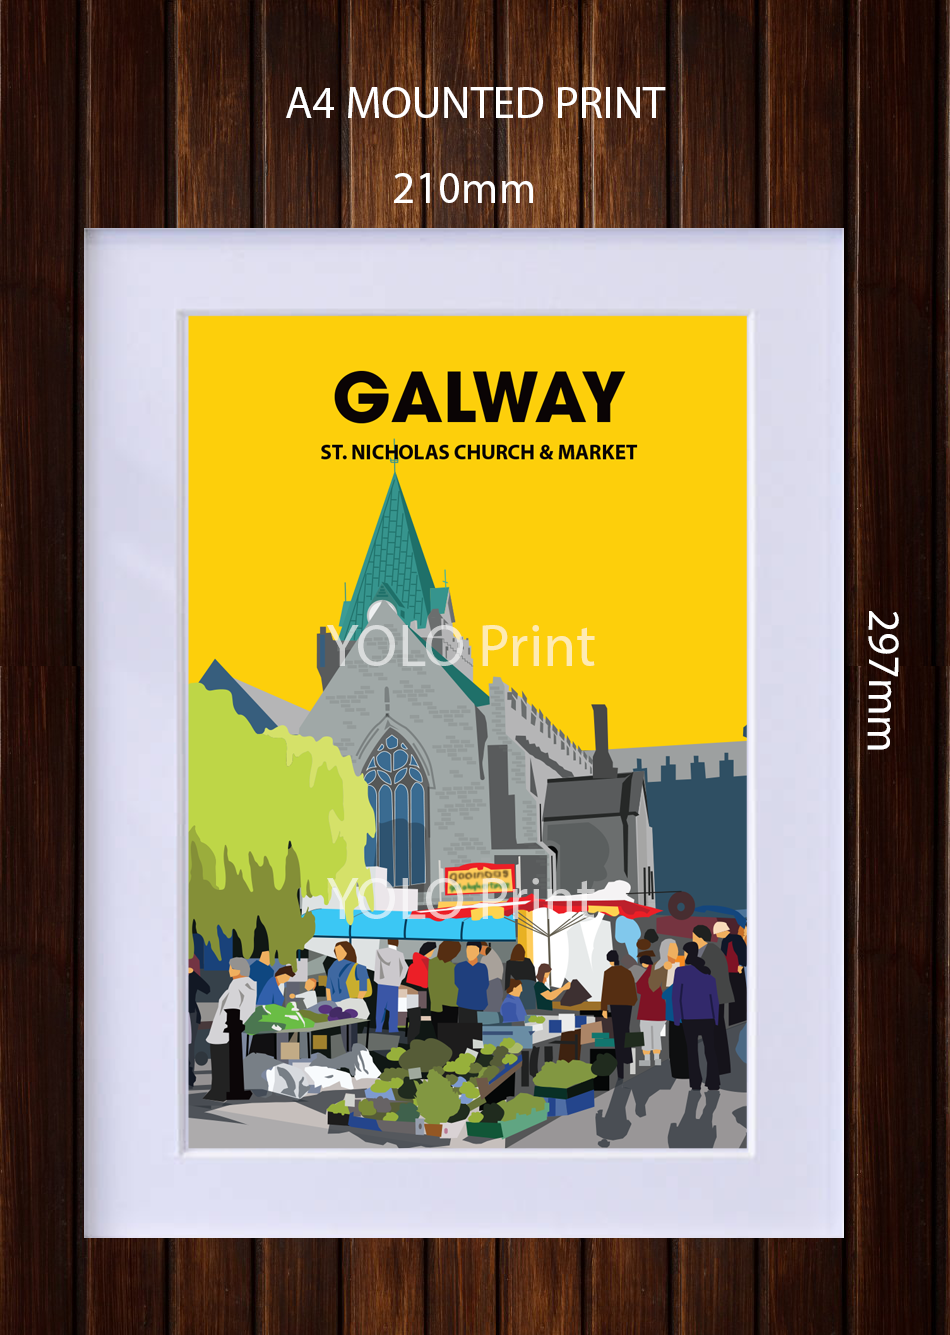 Galway Postcard or A4 Mounted Print  - St. Nicholas Church and Market